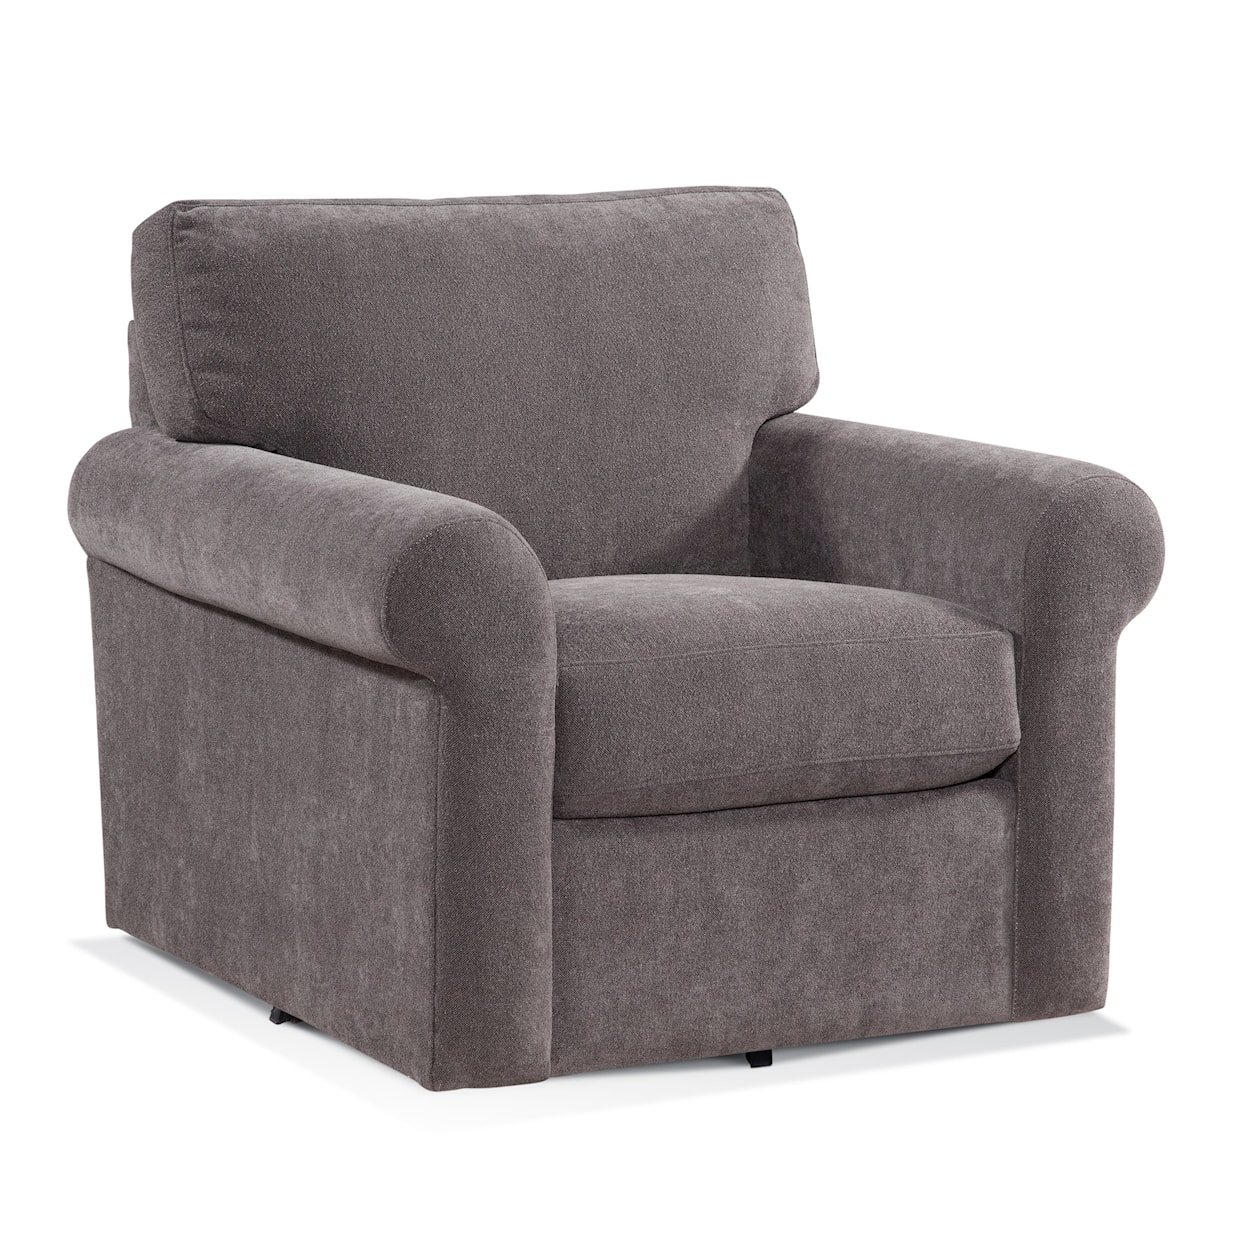 Braxton Culler Bedford Swivel Chair with Topstitch